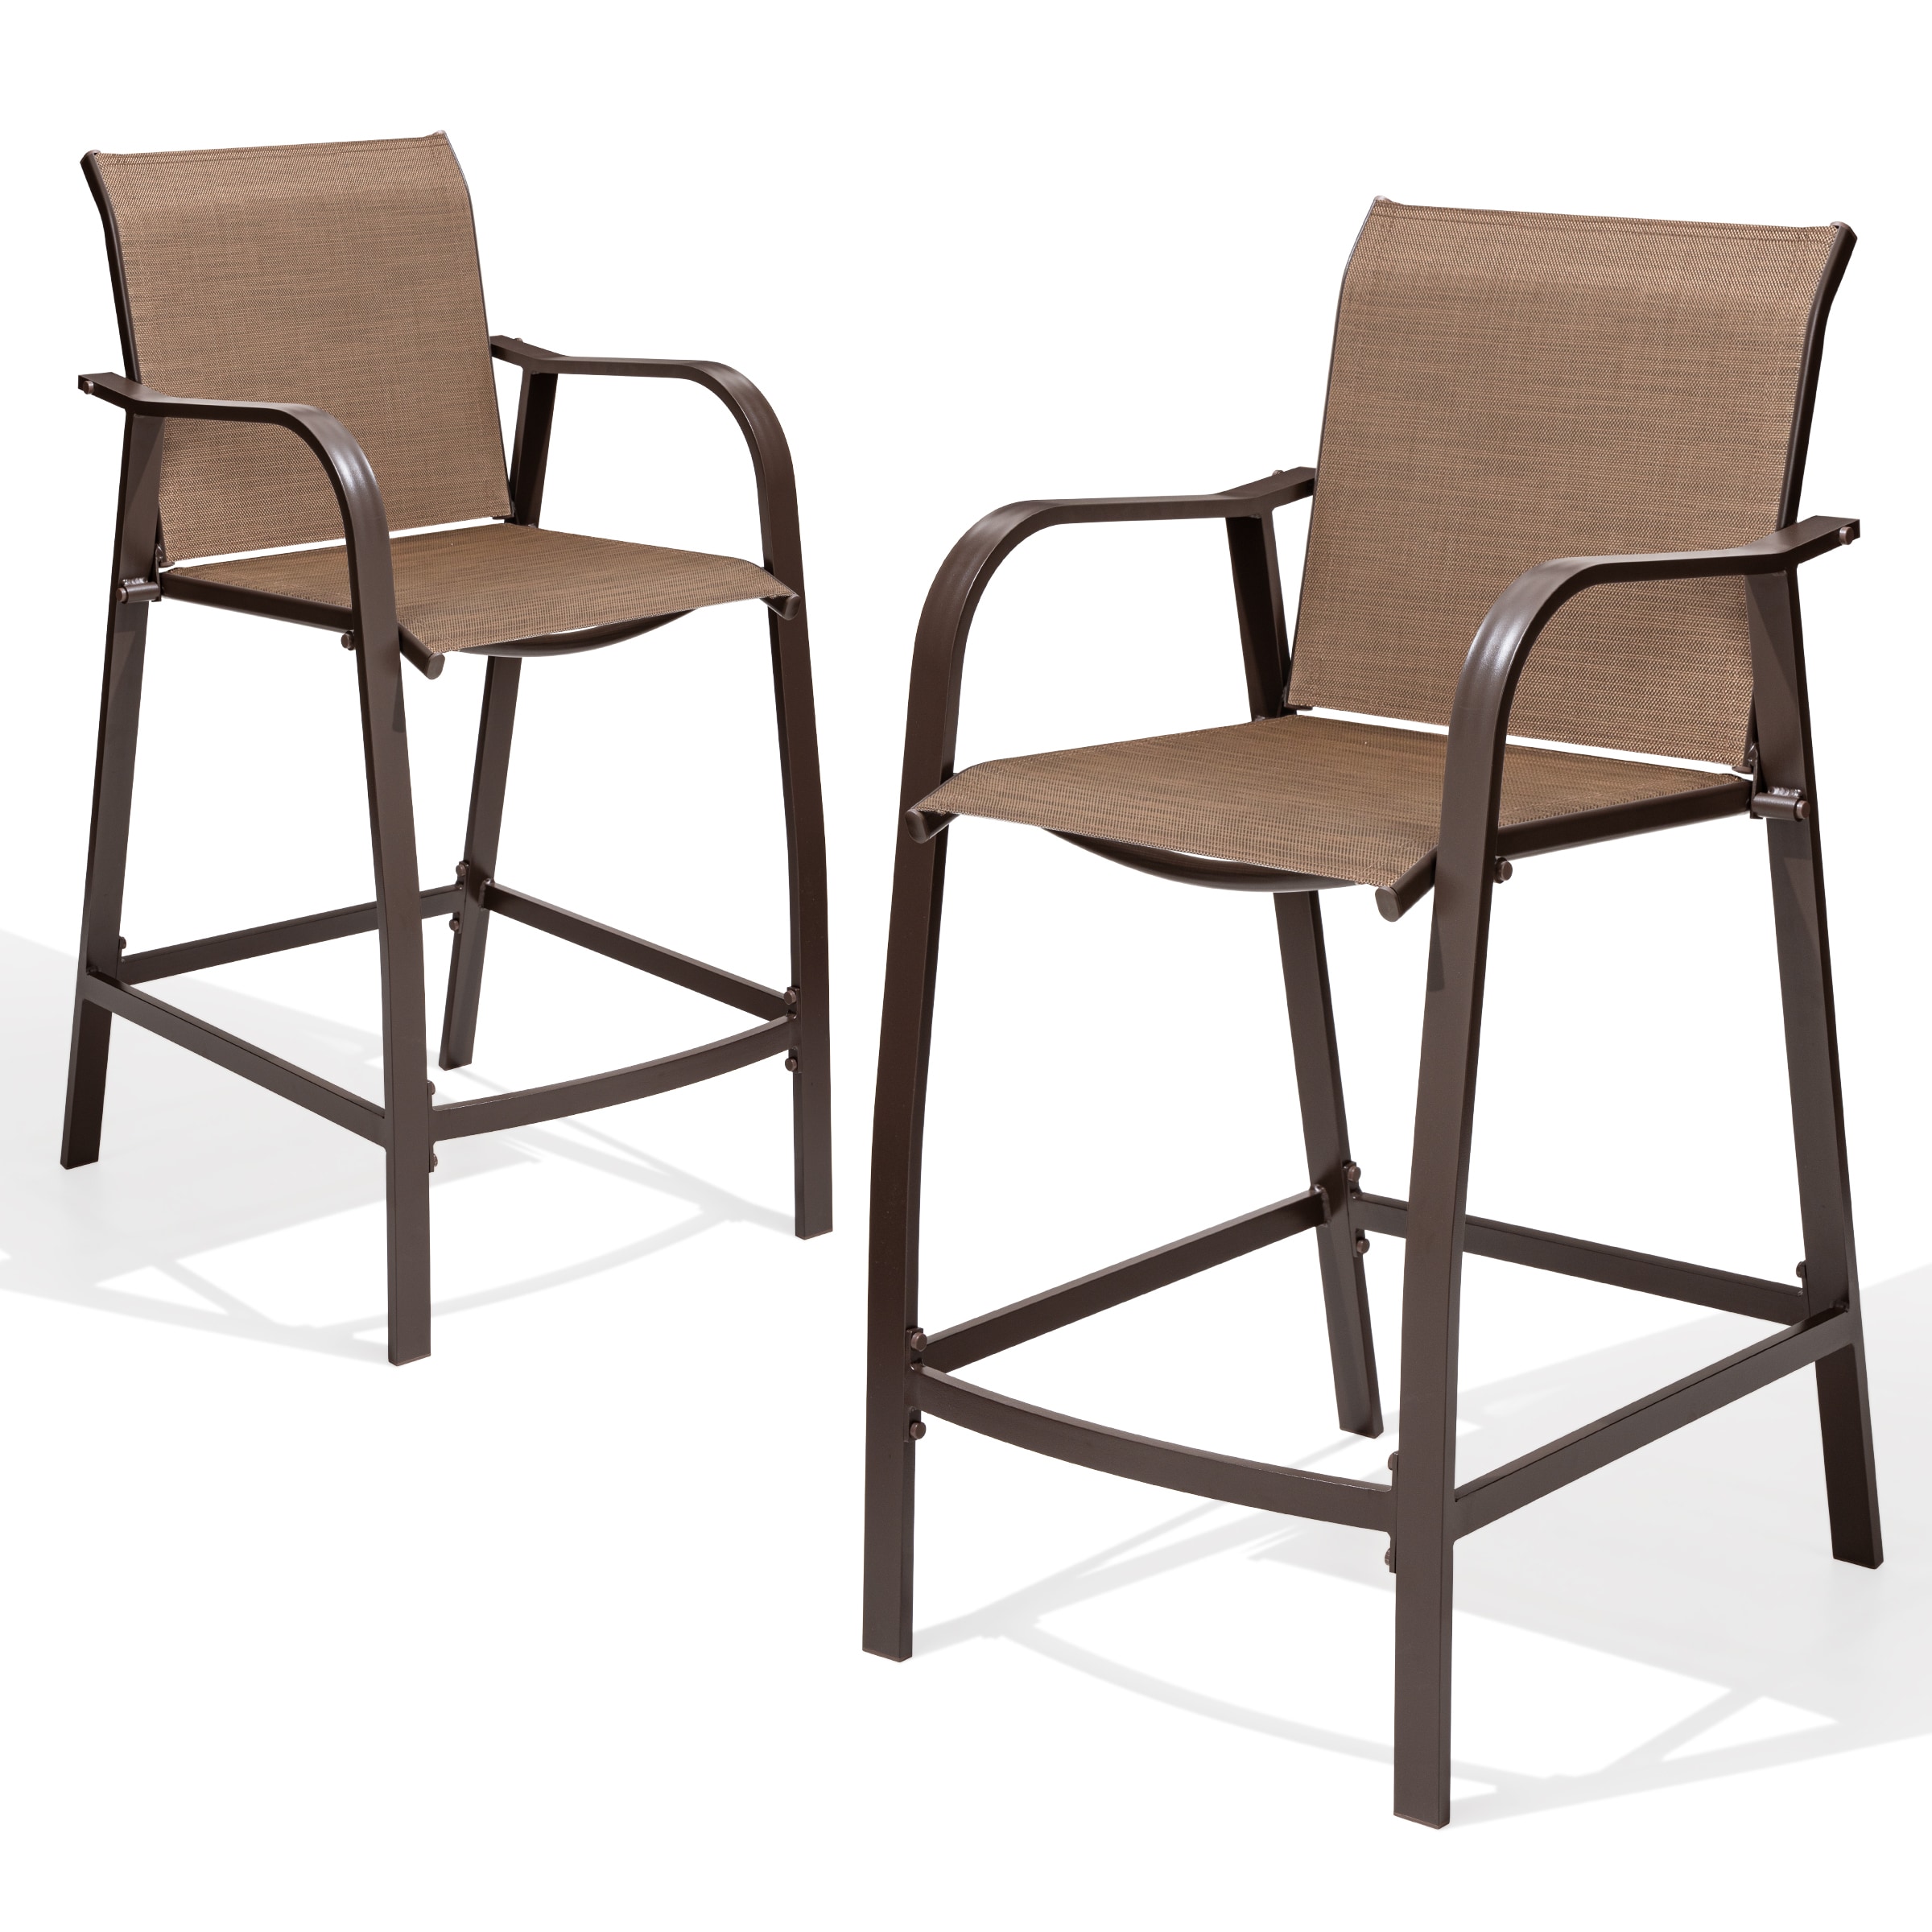 Aluminum Counter Height Bar Stools and Table Set All Weather Furniture in Antique Brown Finish for Outdoor Indoor 2 PCS Bar Chairs with Table Crestlive Products Patio Bar Set Black & Grey 